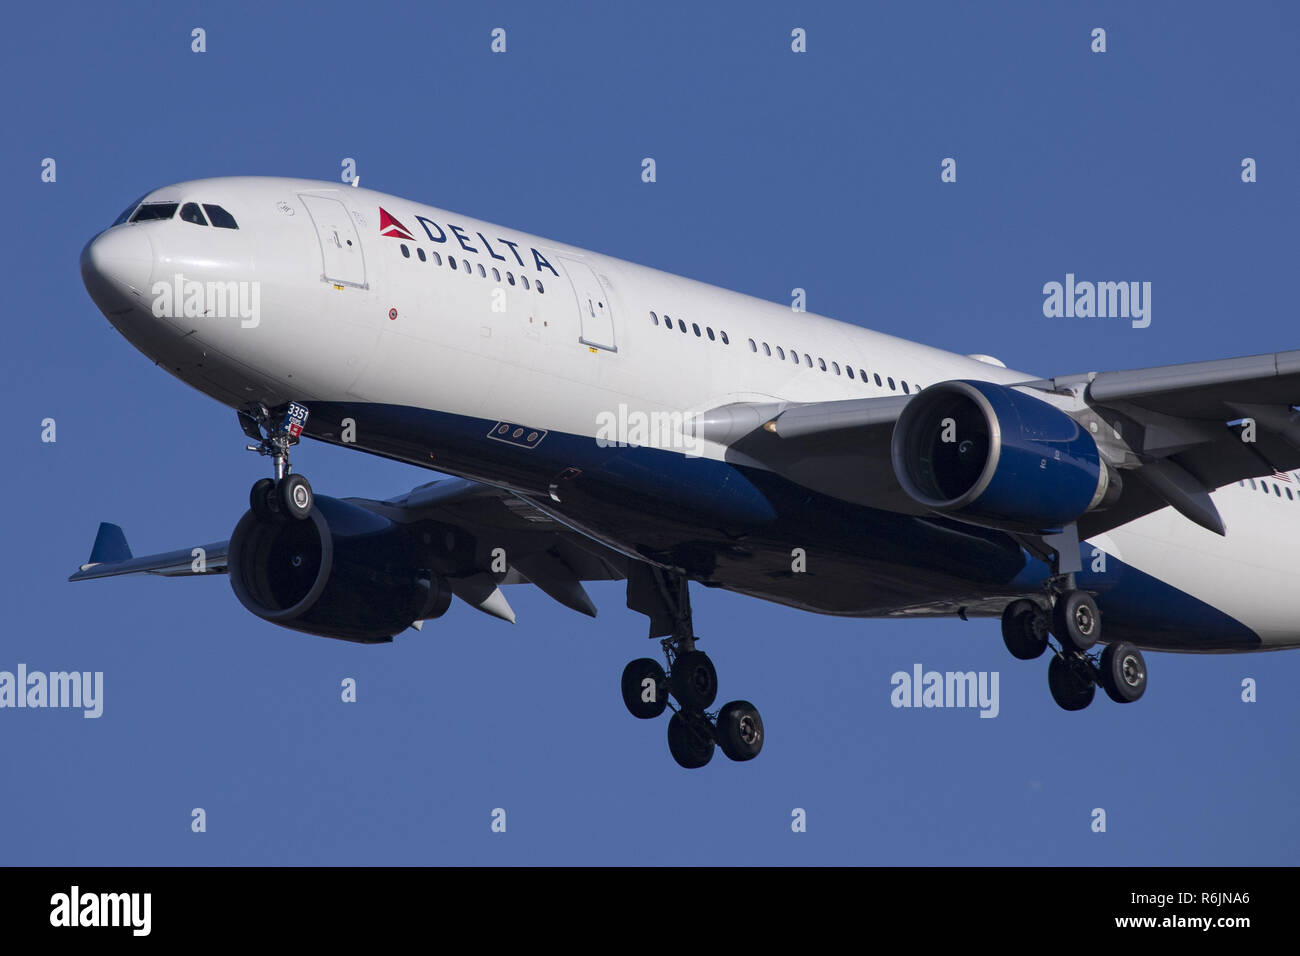 United Kingdom. 30th Nov, 2018. Delta Airlines Airbus A330-200 airplane with registration N851NW is seen landing at the London Heathrow Airport, UK on a sunny day. DAL or Delta Airlines connects London LHR EGLL airport to Atlanta, Boston, Detroit, Minneapolis St. Paul, New York JFK and seasonal to Portland OR and Salt Lake City. The airplane previously flew for Northwest Airlines. Credit: Nicolas Economou/SOPA Images/ZUMA Wire/Alamy Live News Stock Photo